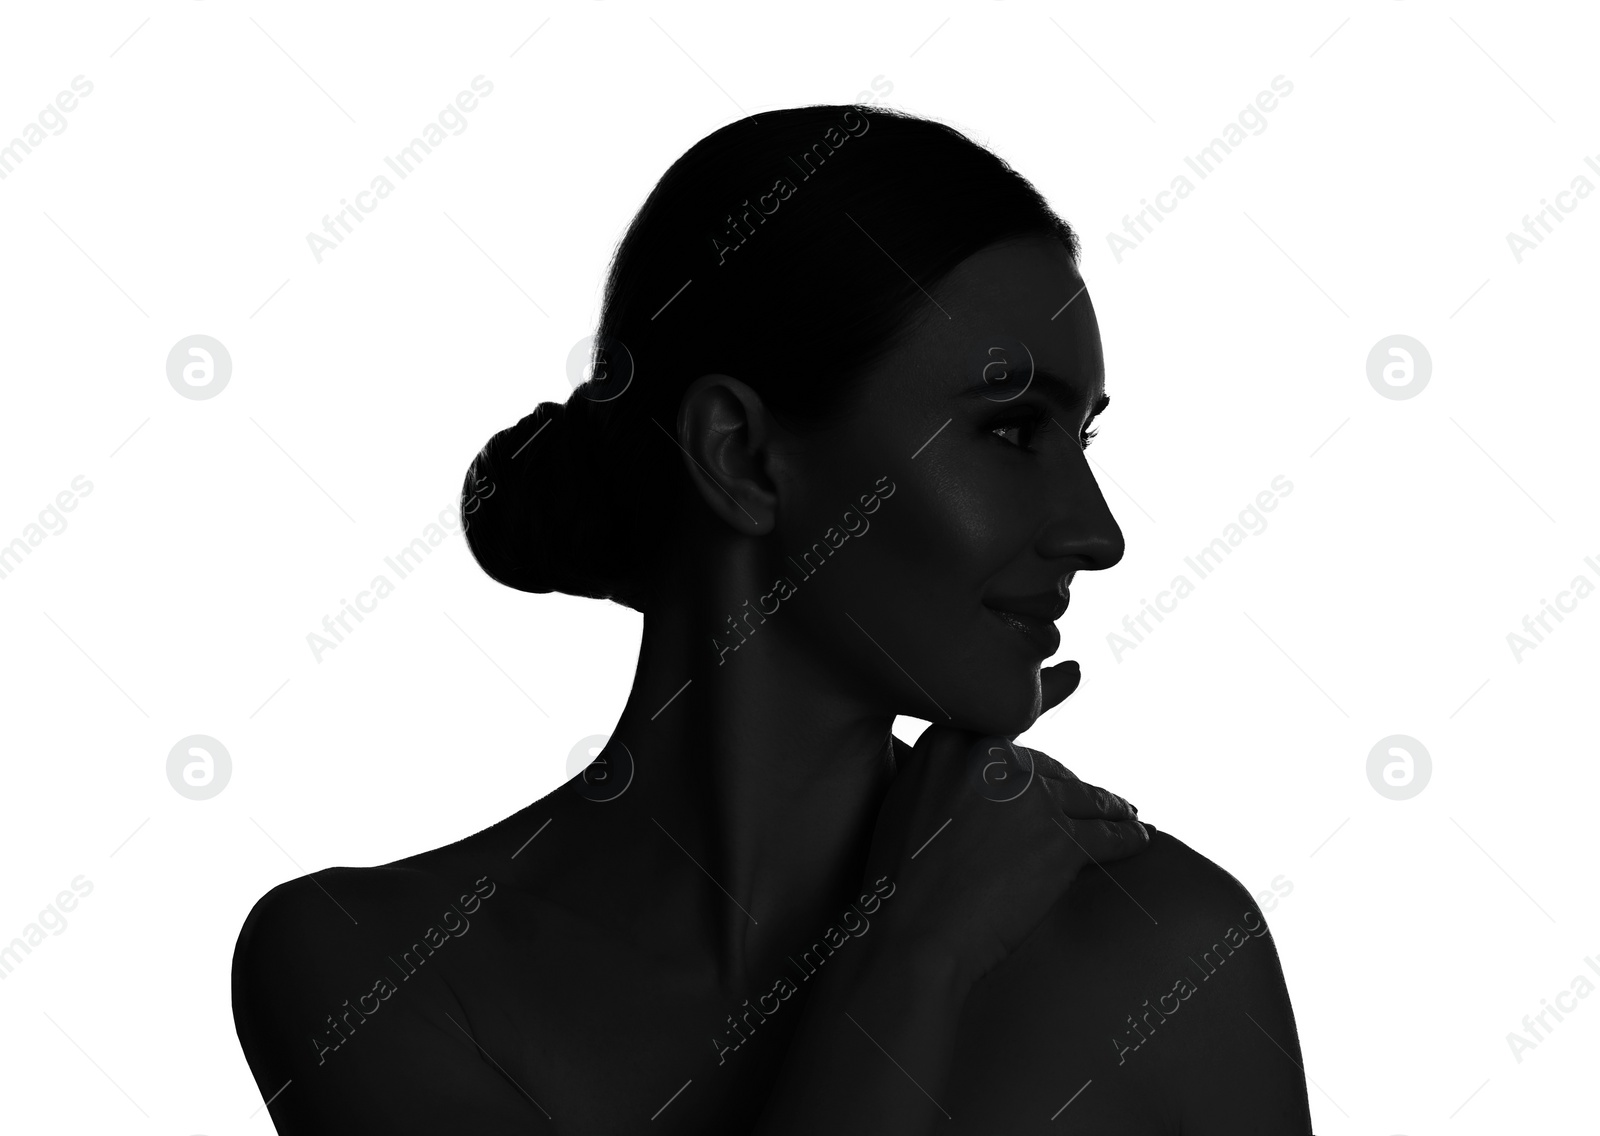 Image of Silhouette of woman isolated on white, profile portrait